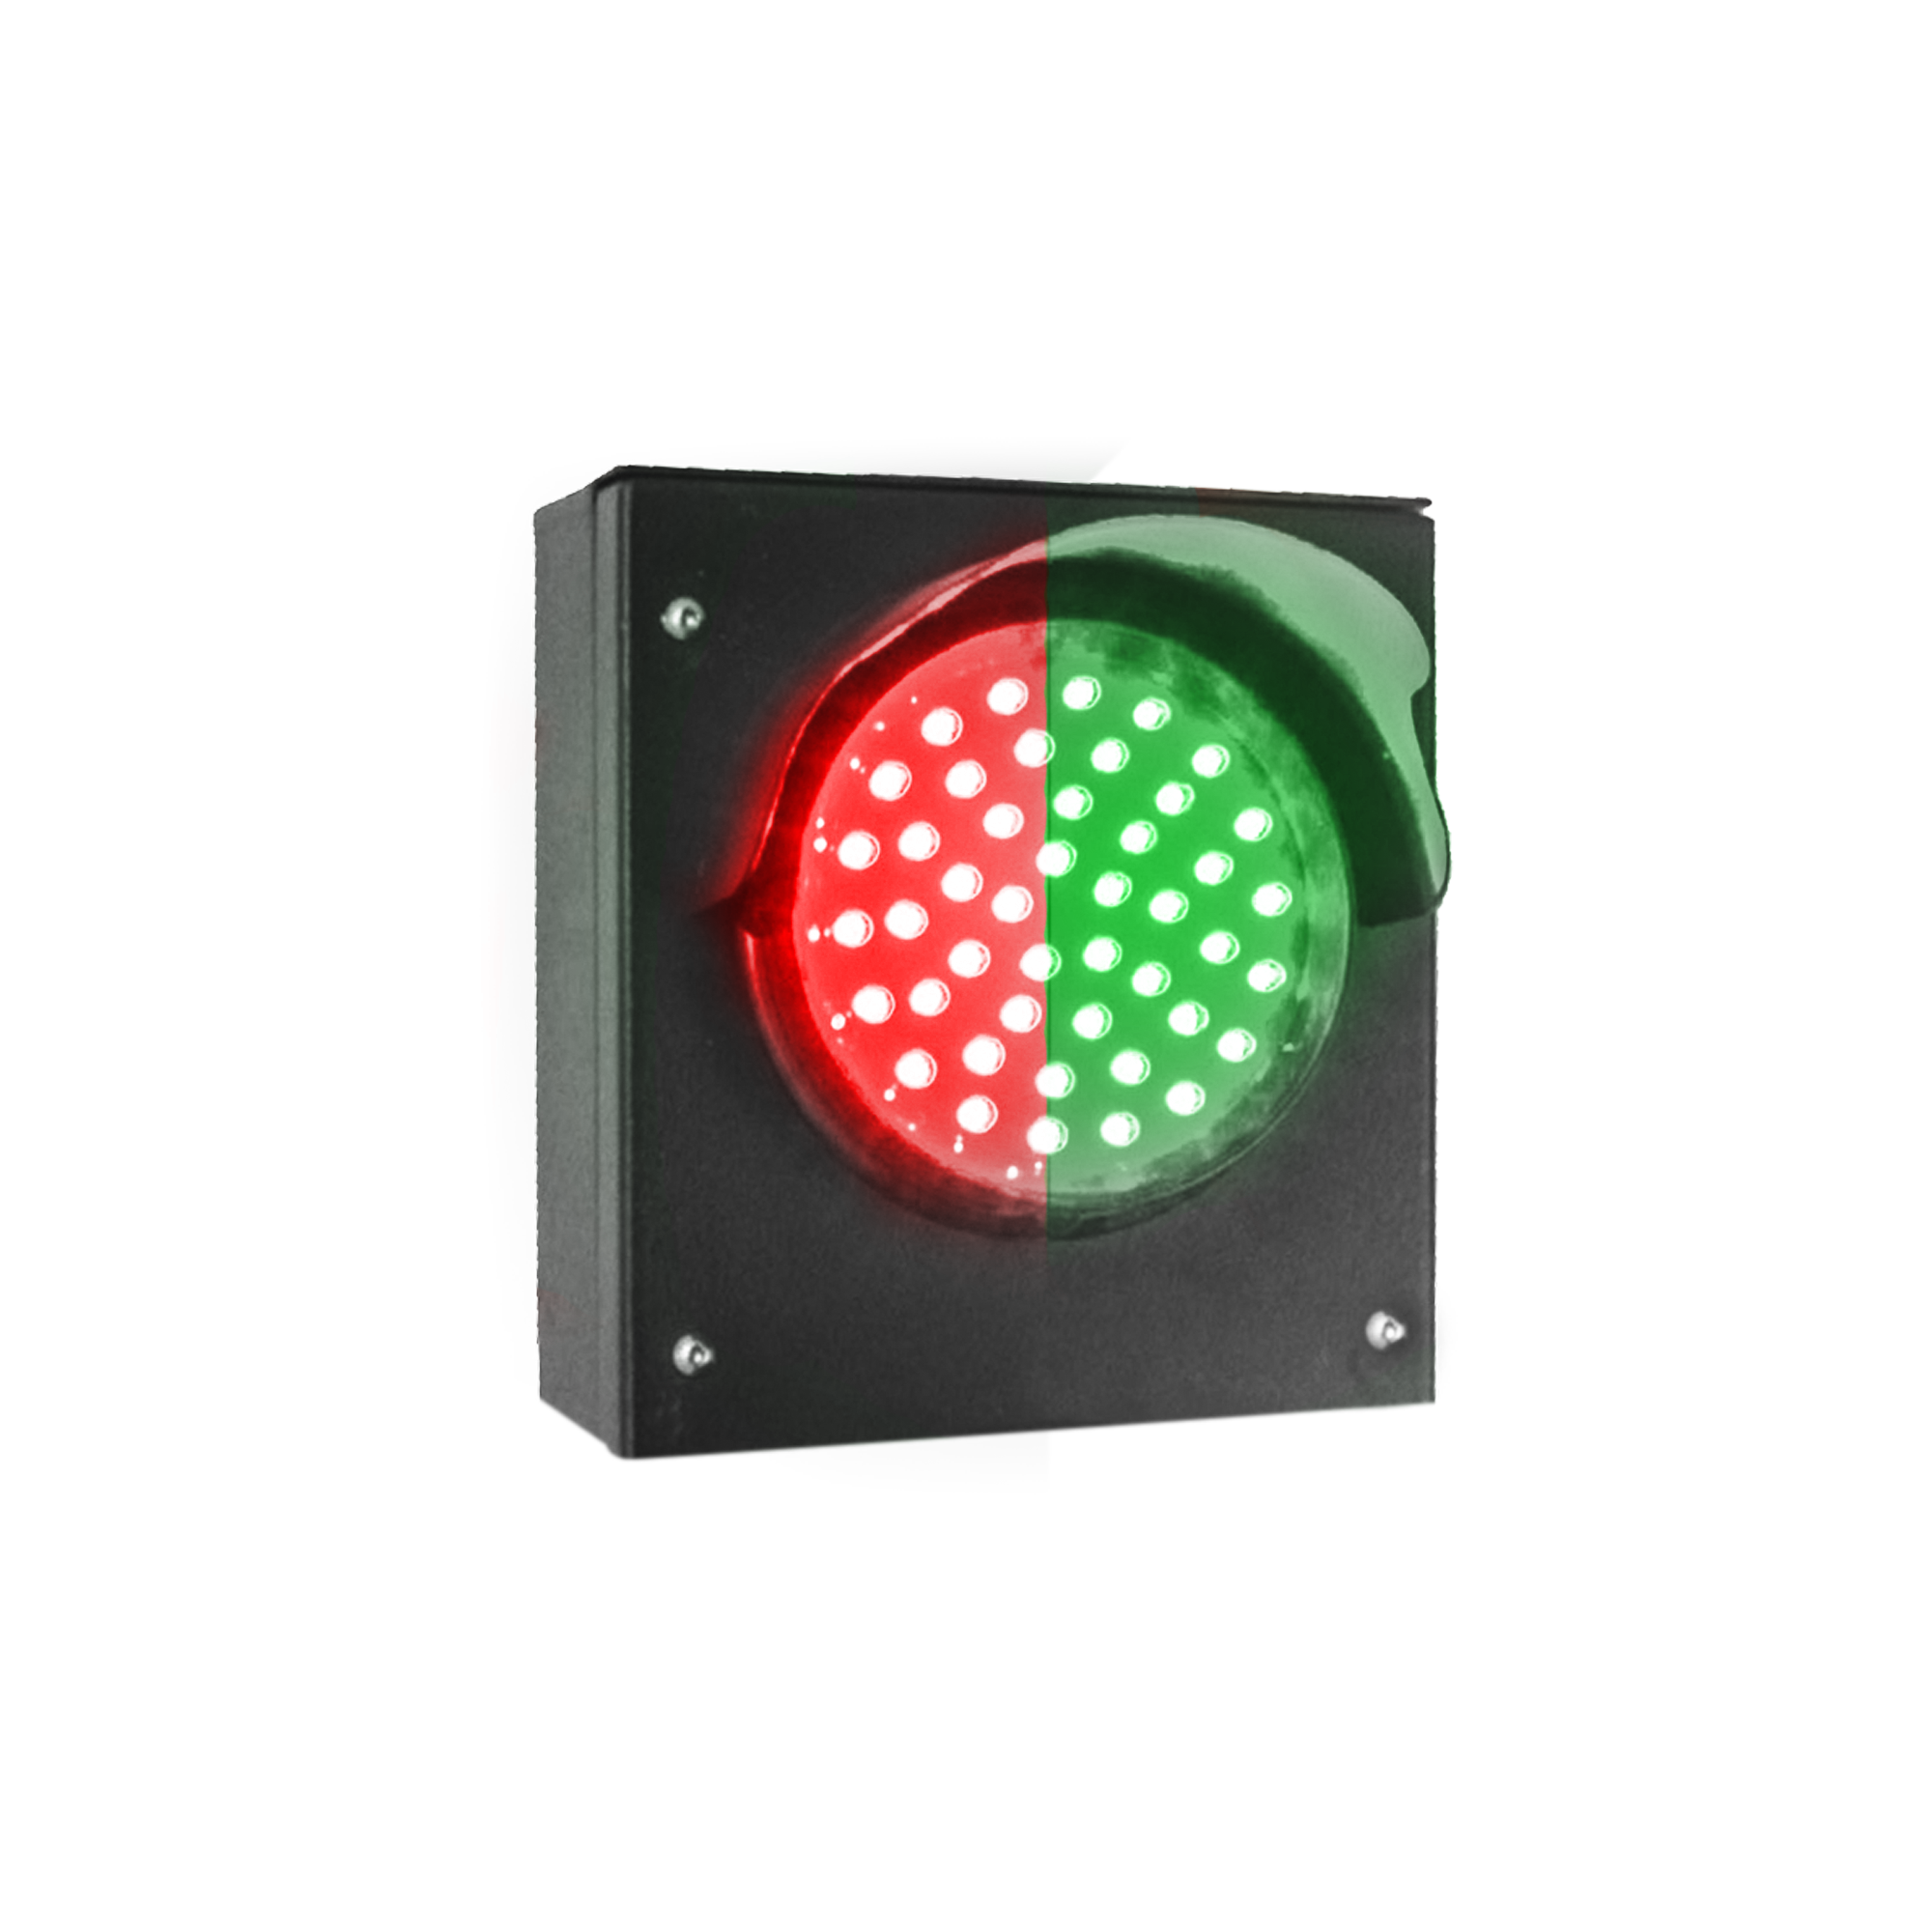 Inch Diameter 2-in-1 Lens LED Stop-Go Loading Dock Traffic Light, Color,  110/220VAC (Ready to Wire)